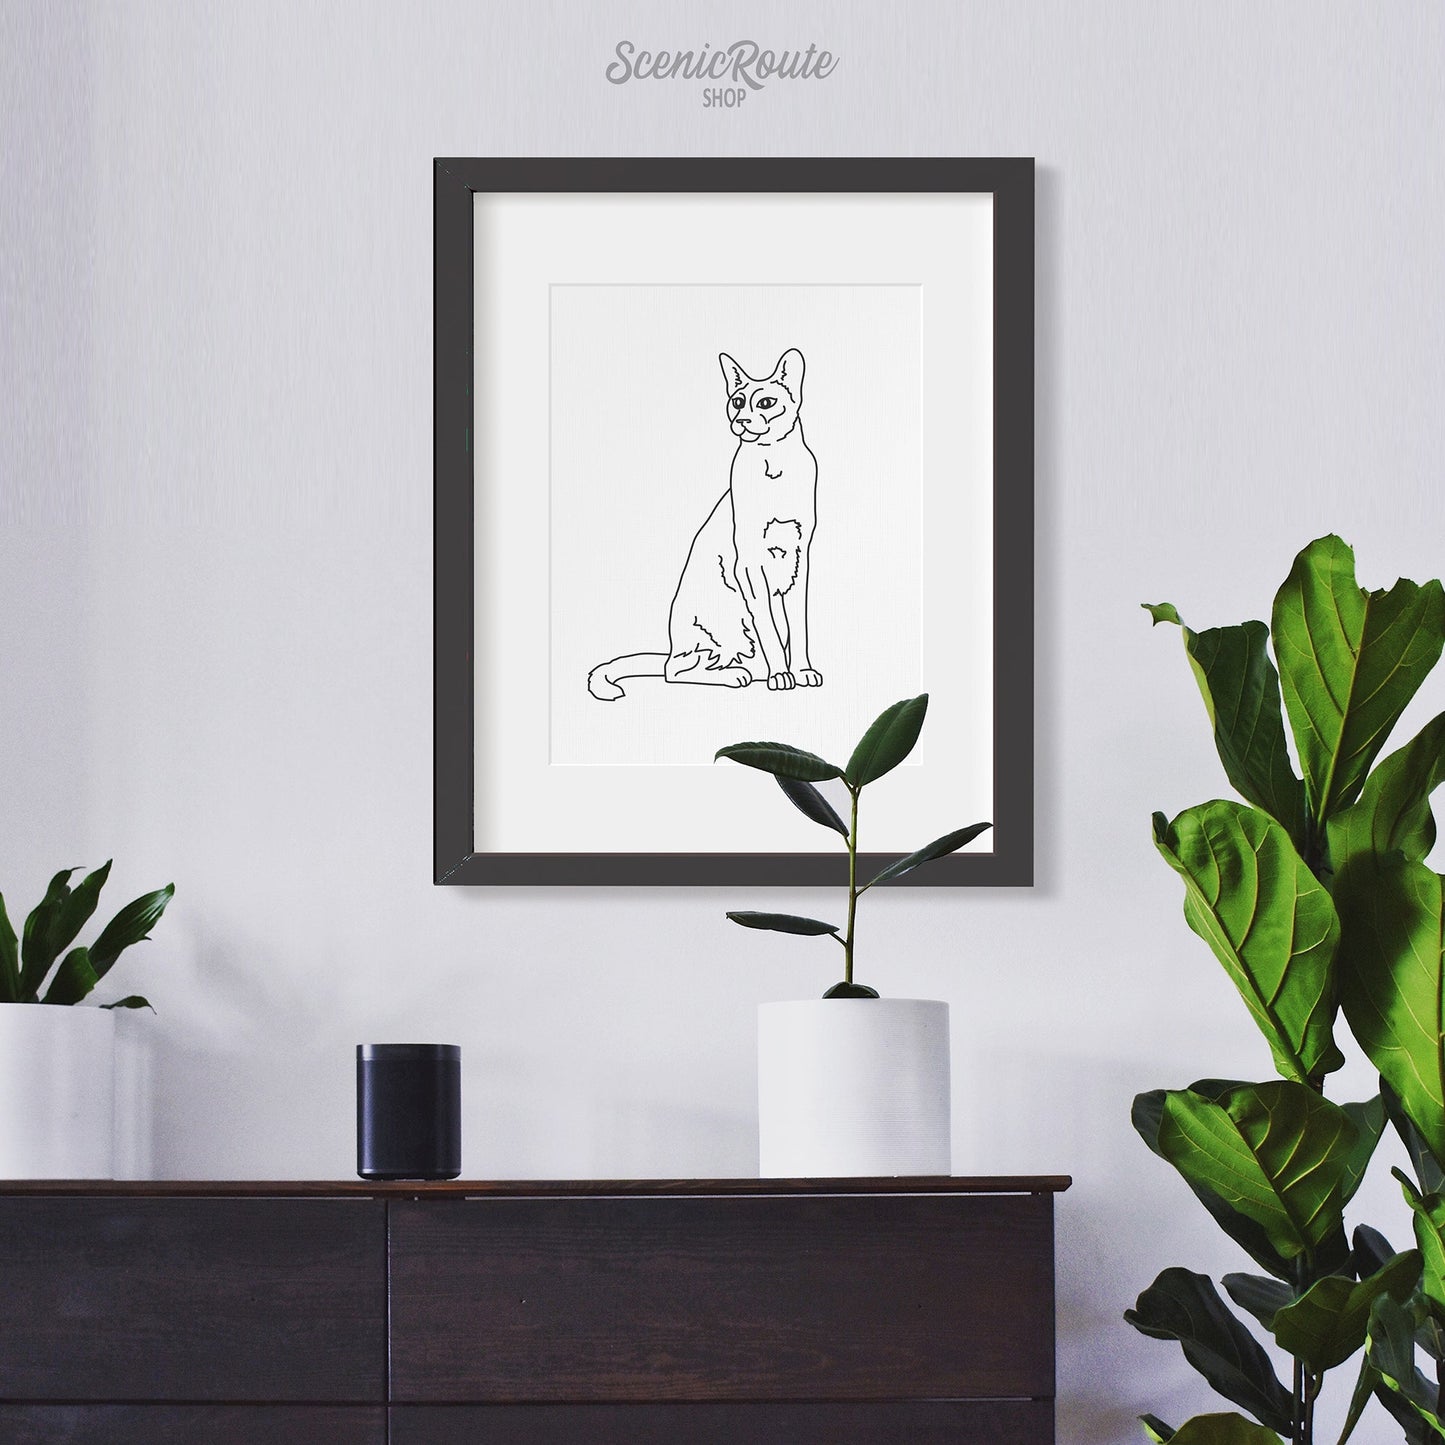 A framed line art drawing of a Siamese cat hanging above a dresser with plants